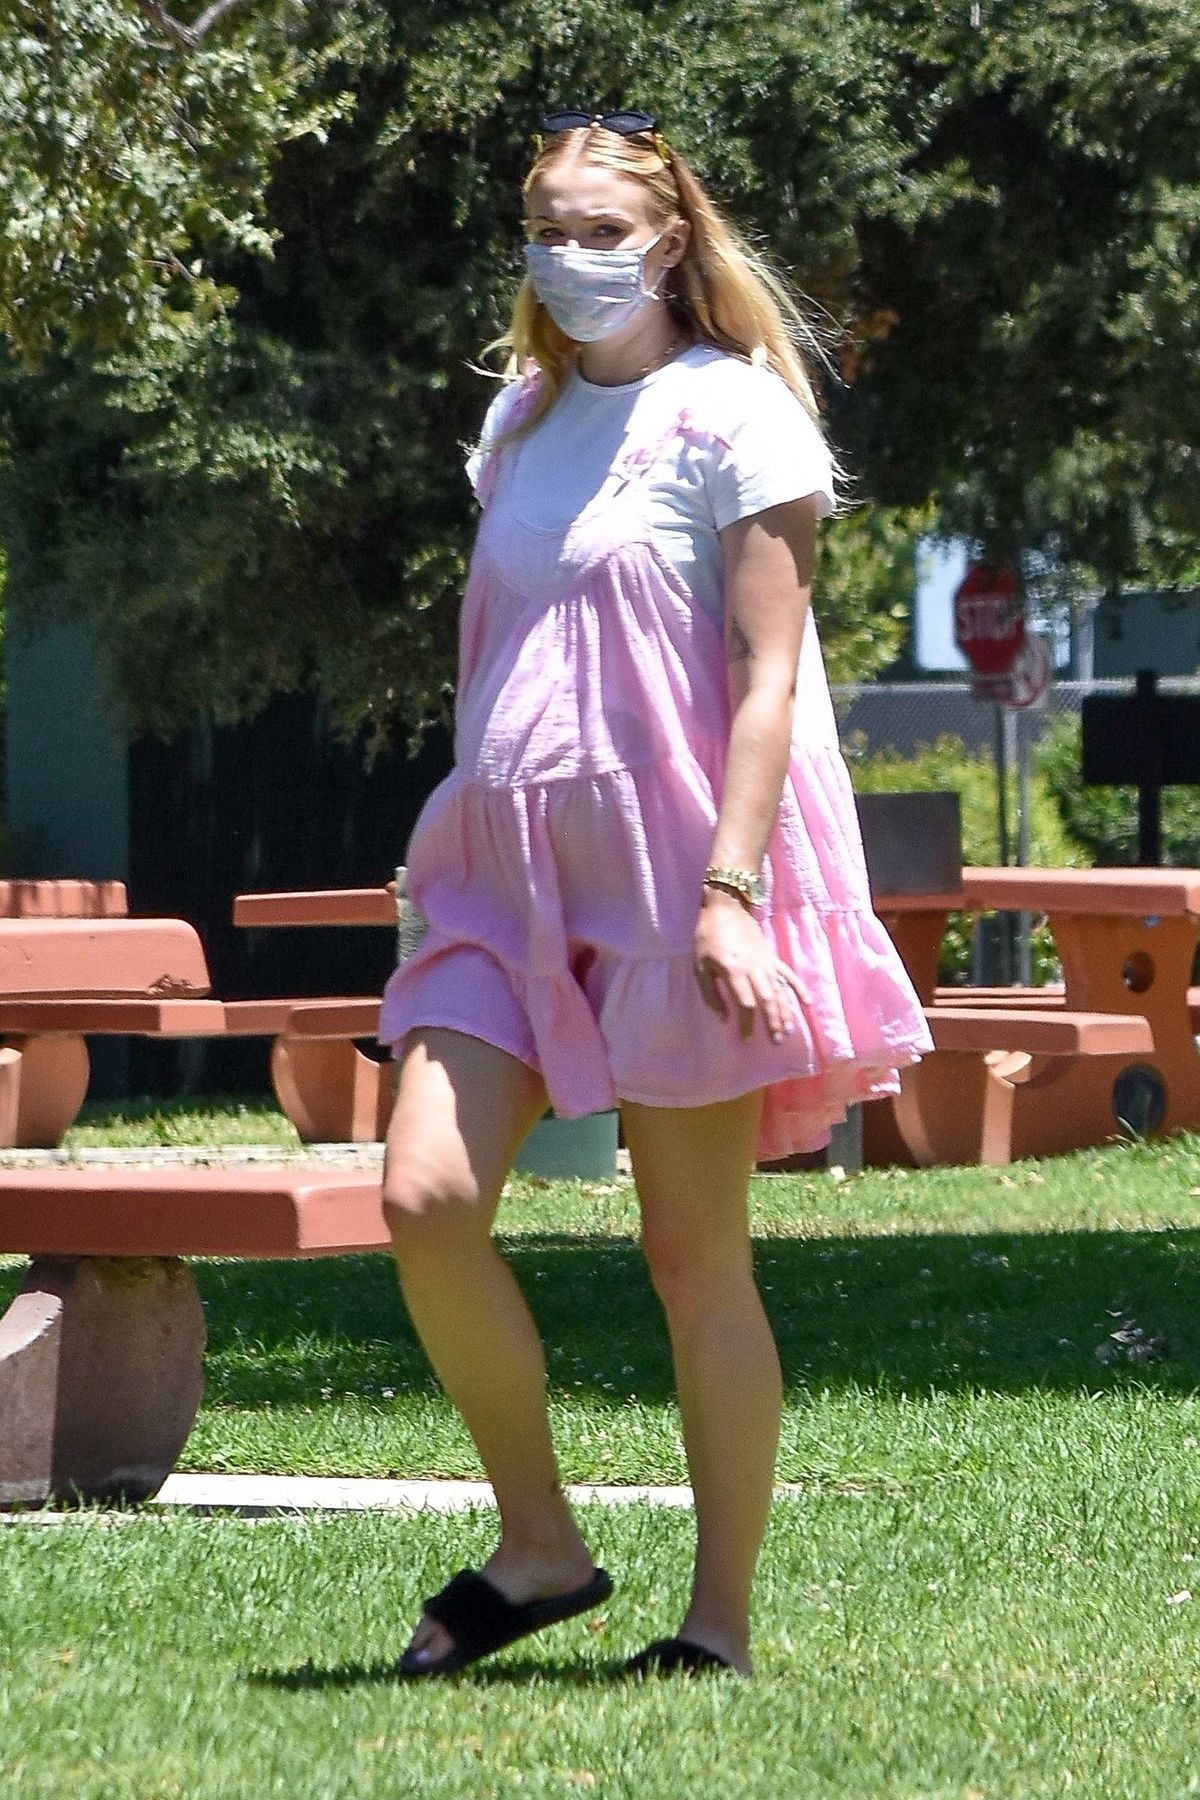 studio city, ca    parents to be sophie turner and joe jonas go on a picnic with friends and family in studio city sophie covered her bump in a pink babydoll dress while joe sports blue as  the expecting couple enjoy a day outpictured sophie turnerbackgrid usa 6 july 2020 usa 1 310 798 9111  usasalesbackgridcomuk 44 208 344 2007  uksalesbackgridcomuk clients   pictures containing childrenplease pixelate face prior to publication